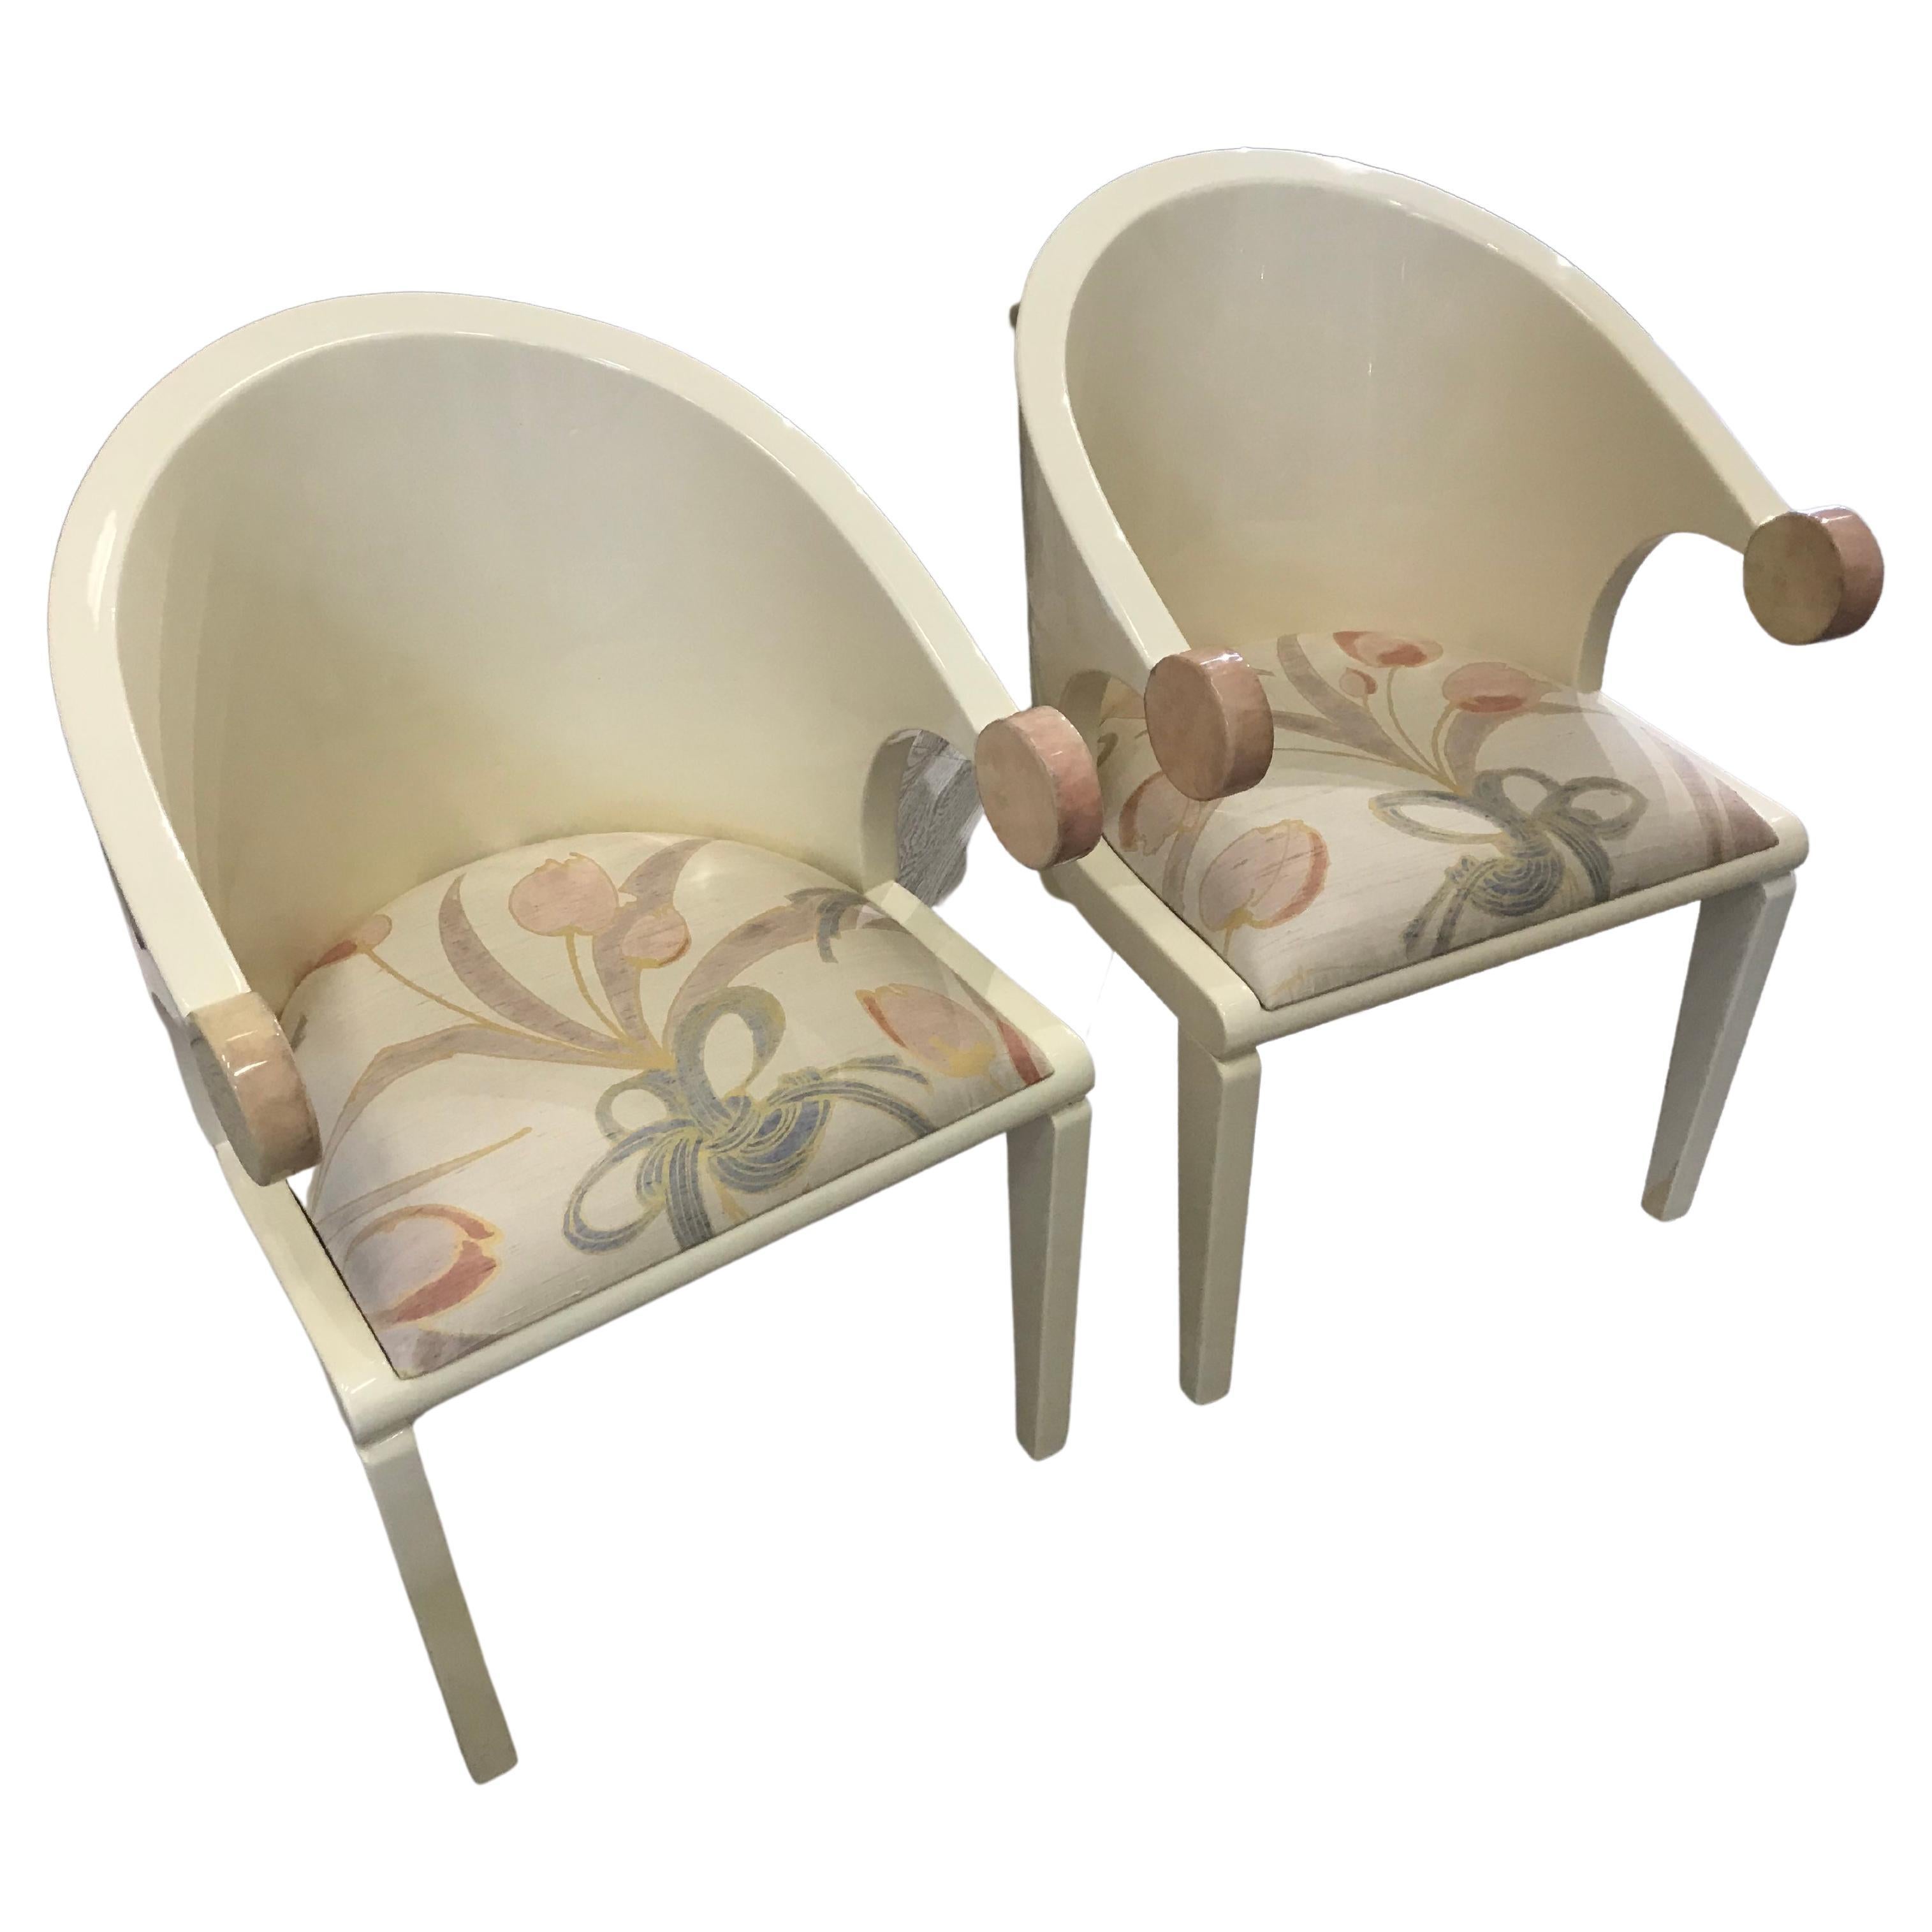 Pair of Post Modern Chairs For Sale